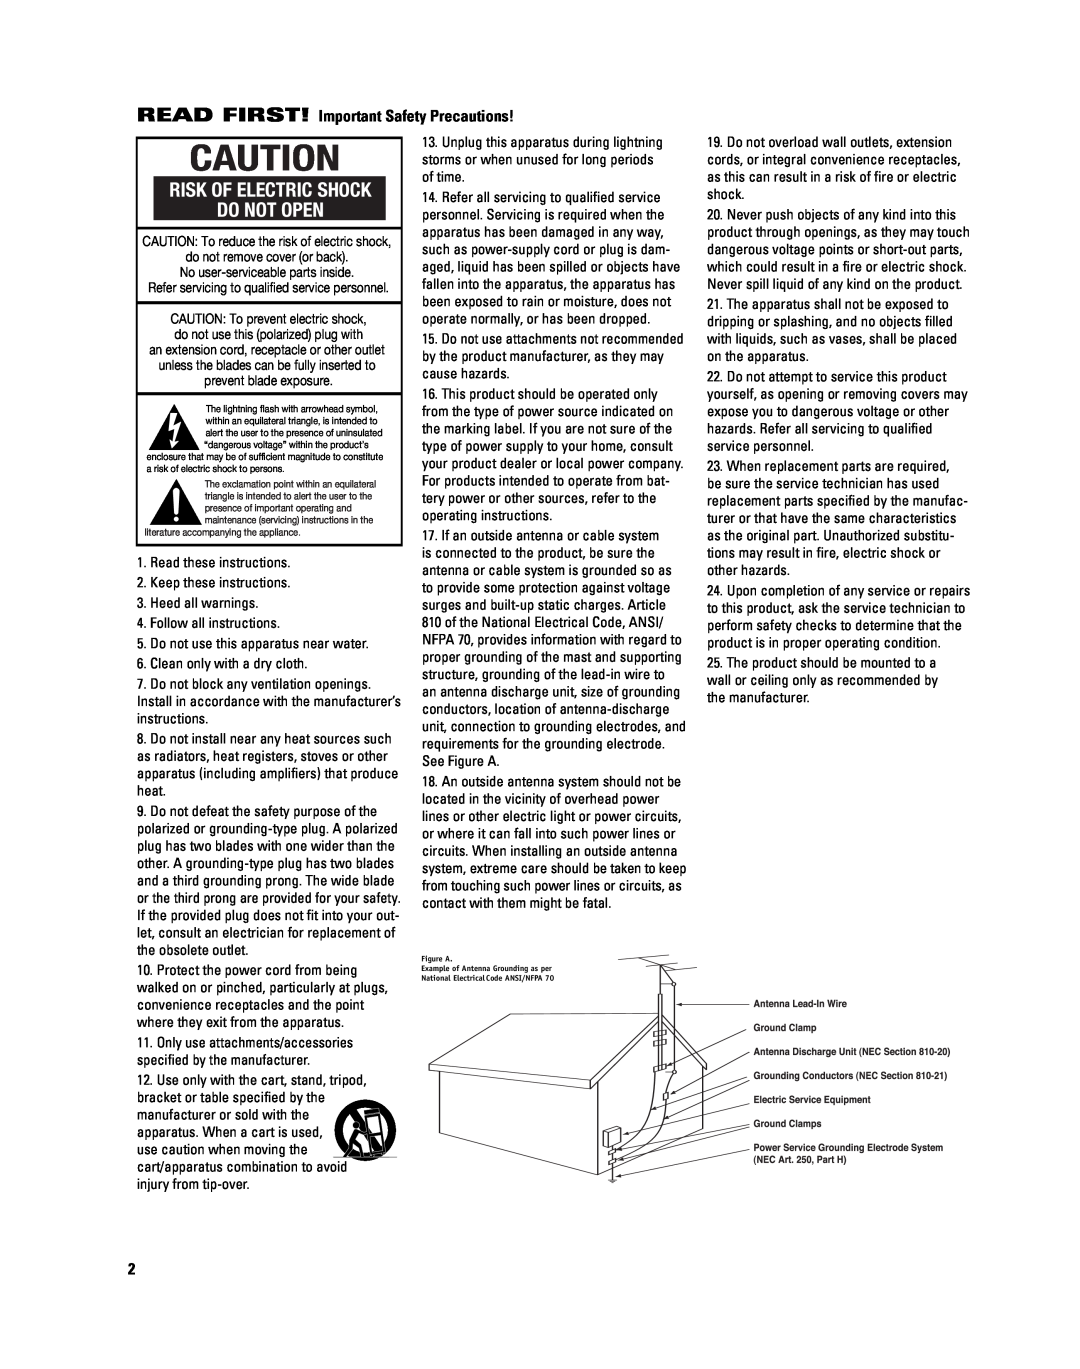 JBL SUB10 manual Risk Of Electric Shock, READ FIRST! Important Safety Precautions, Do Not Open 